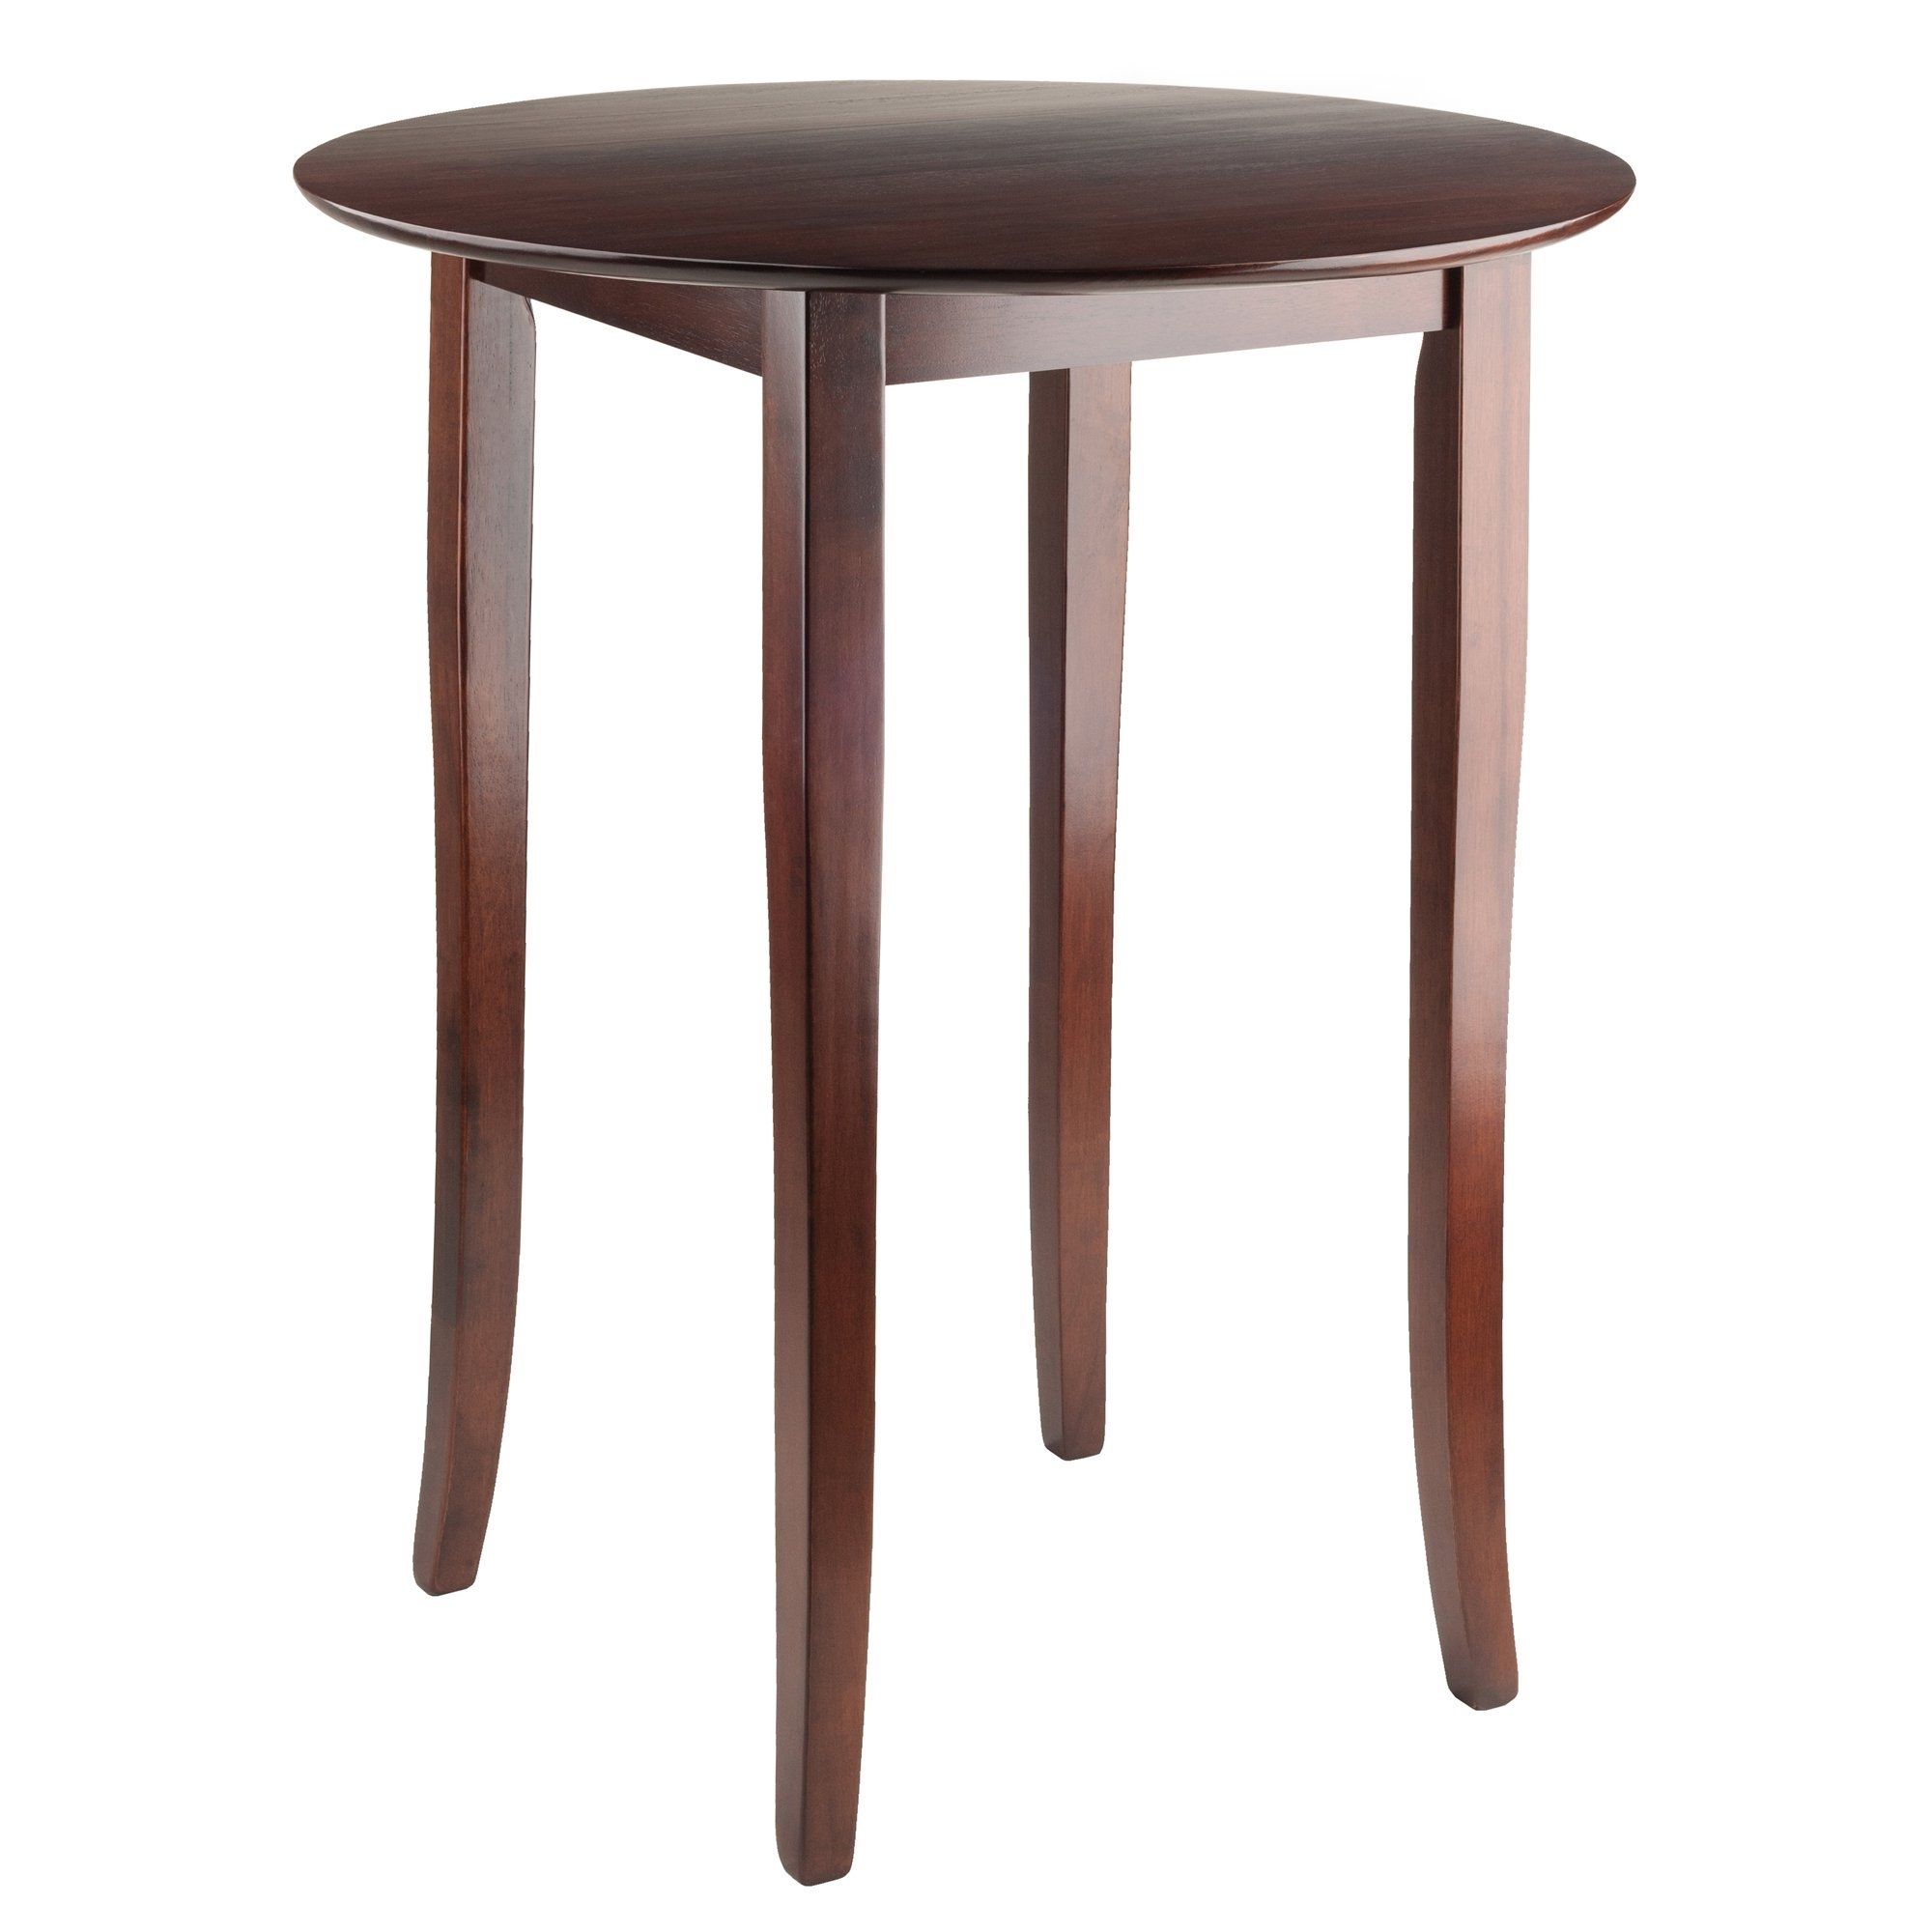 Amazon: Winsome Fiona Round High Pub Table In Antique Walnut Intended For Recent Cora 5 Piece Dining Sets (View 15 of 25)